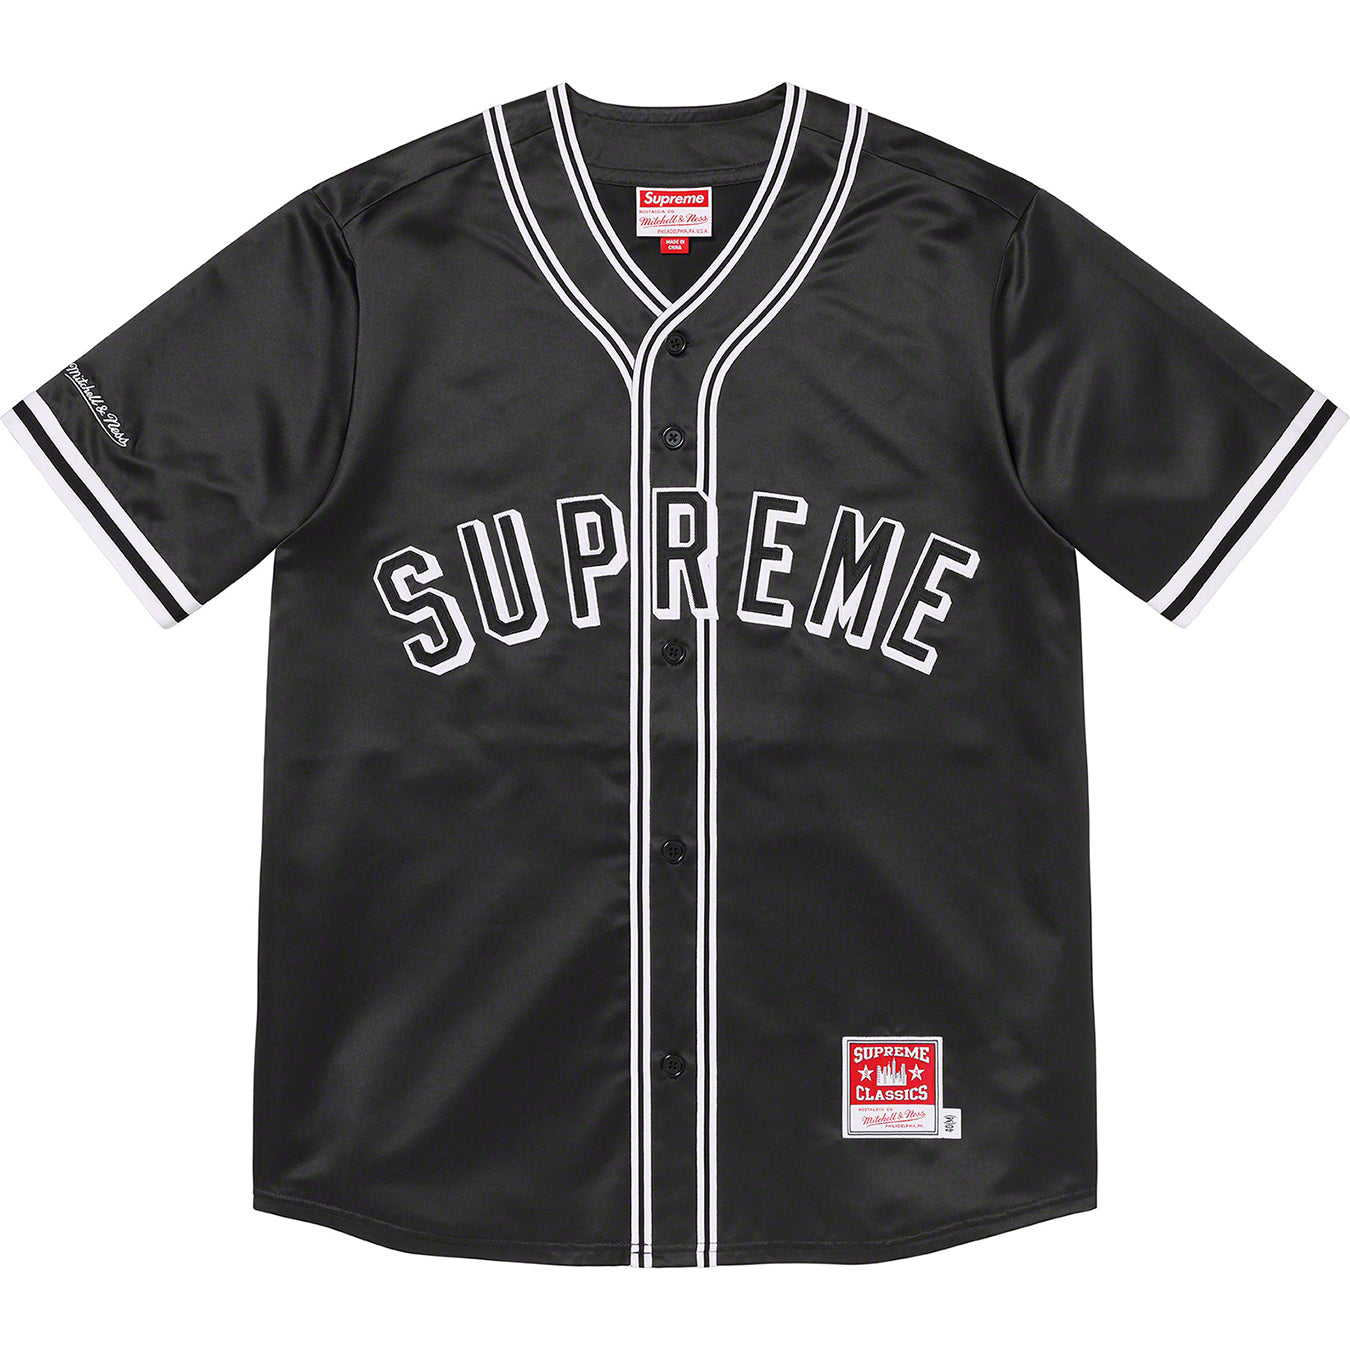 Supreme Satin Baseball Jersey ❤ liked on Polyvore featuring tops